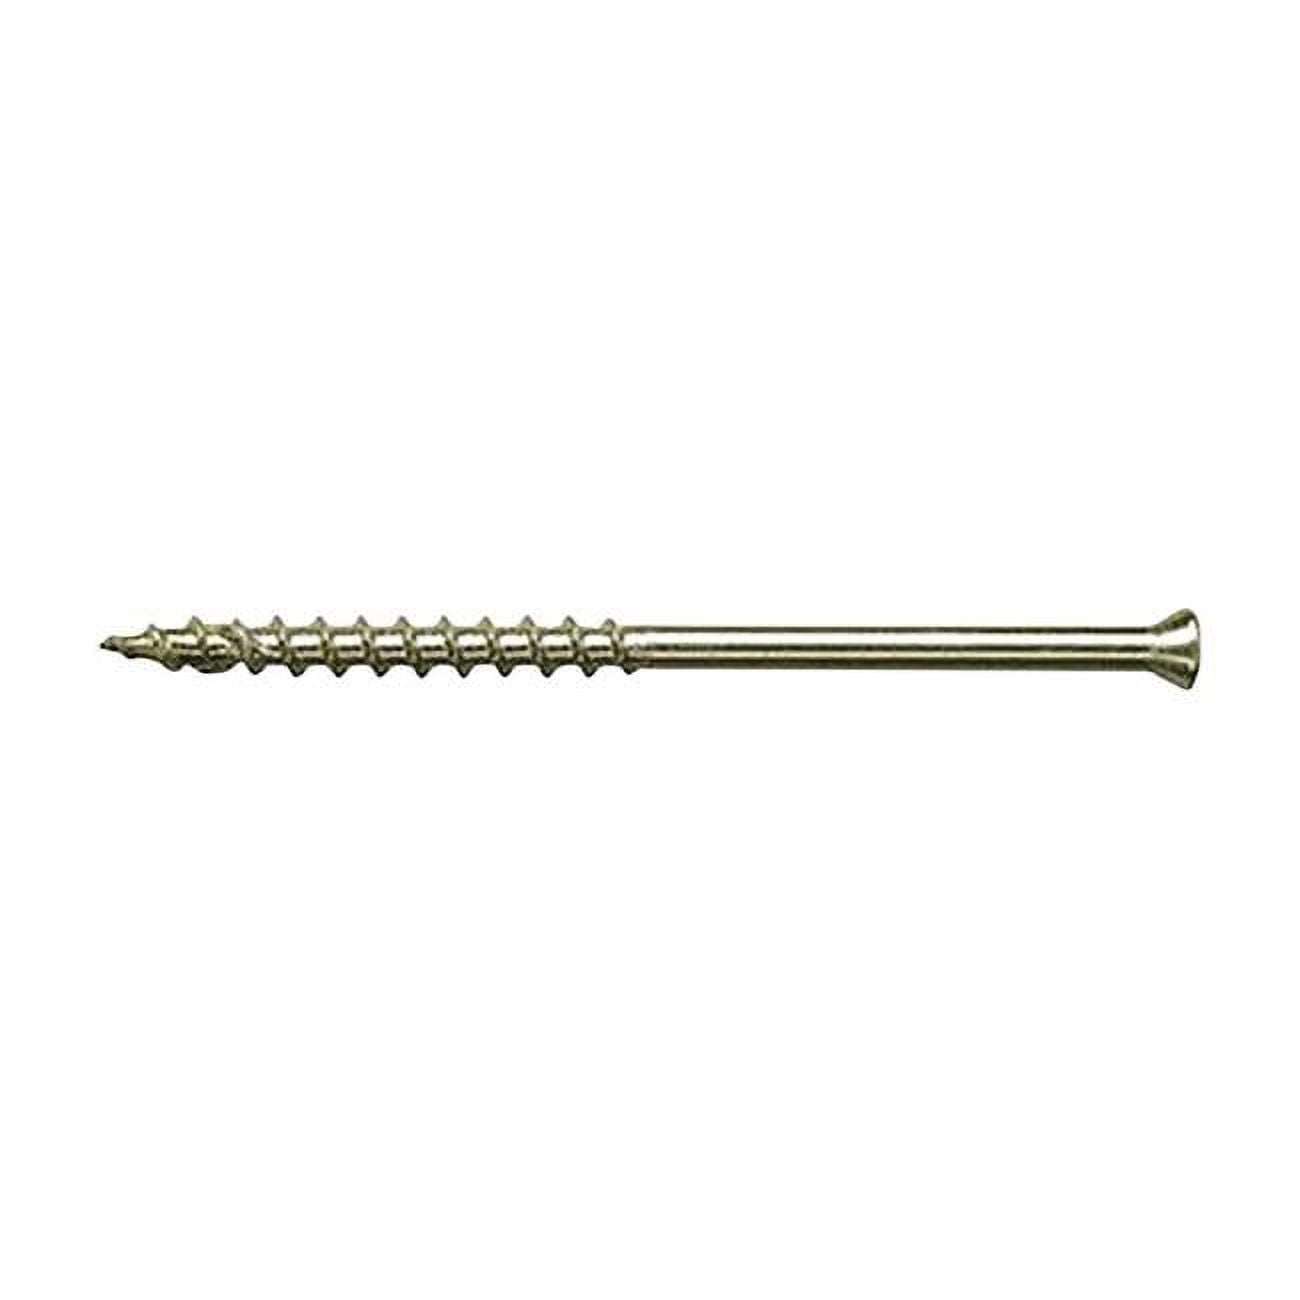 5007673 No. 8 X 3 In. Square Trim Head Stainless Steel Trim Screws, 5 Lbs - Pack Of 6